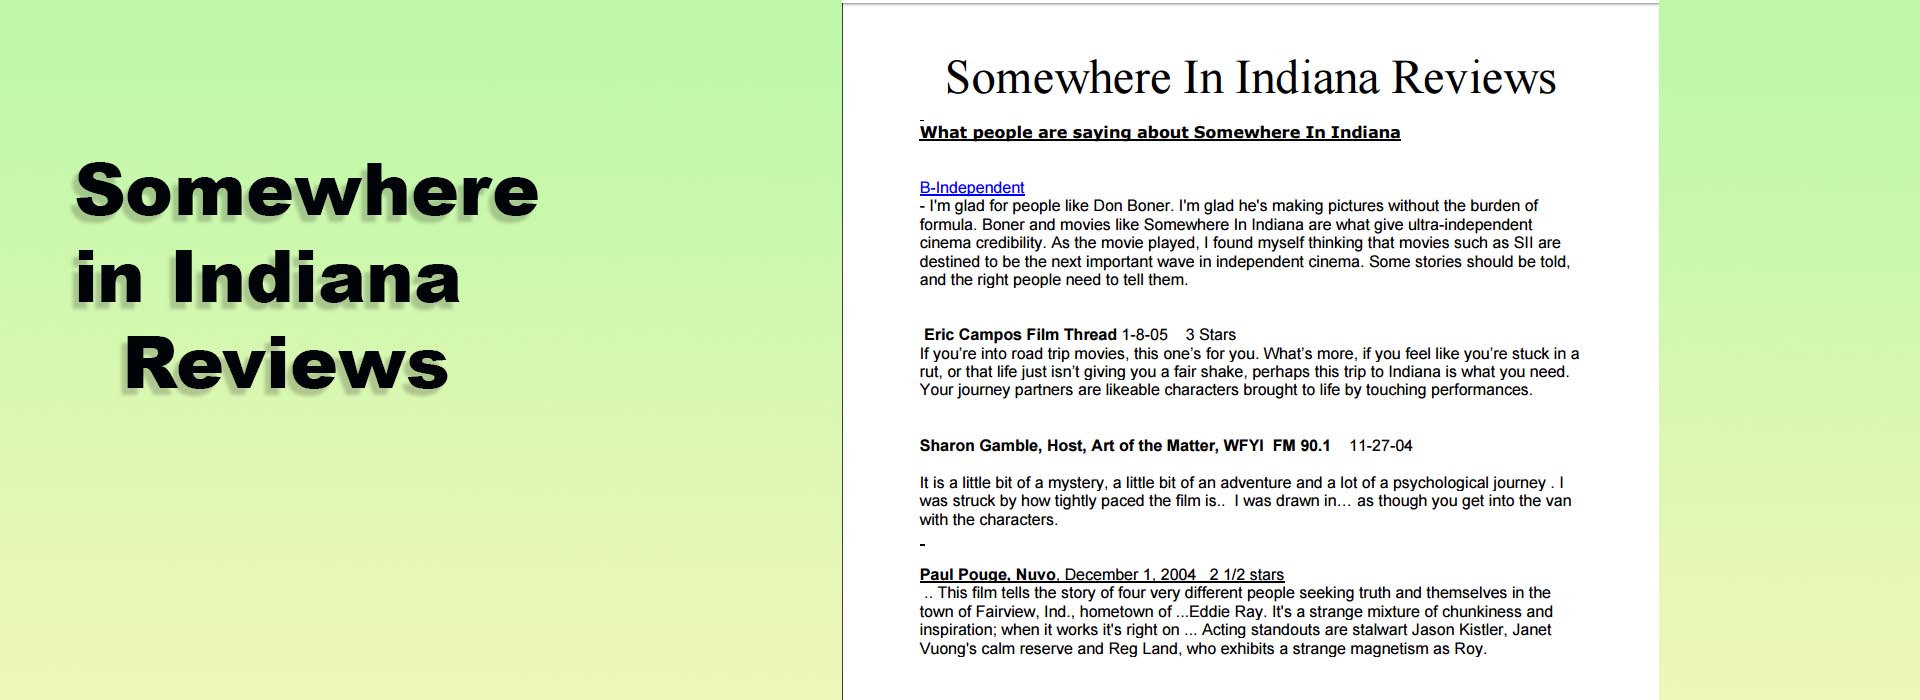 Somewhere in Indiana Reviews